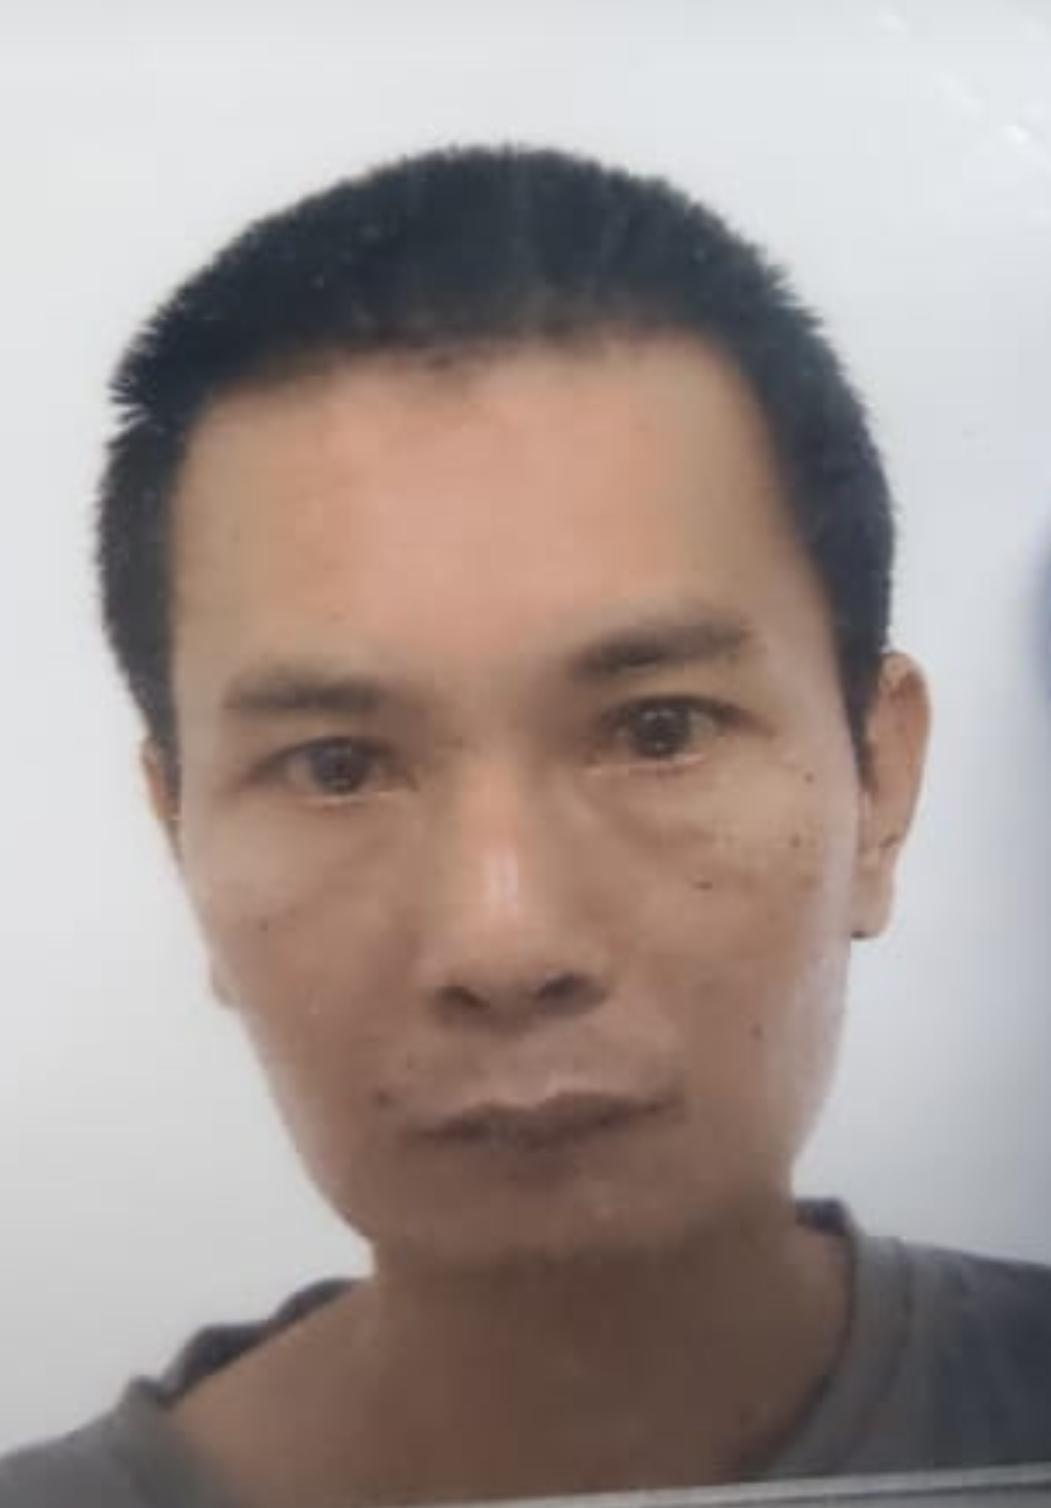 Hui Kwai-keung, aged 53, is about 1.65 metres tall, 60 kilograms in weight and of thin build. He has a long face with yellow complexion and short black hair. He was last seen wearing a white short-sleeved shirt, black trousers and red slippers.